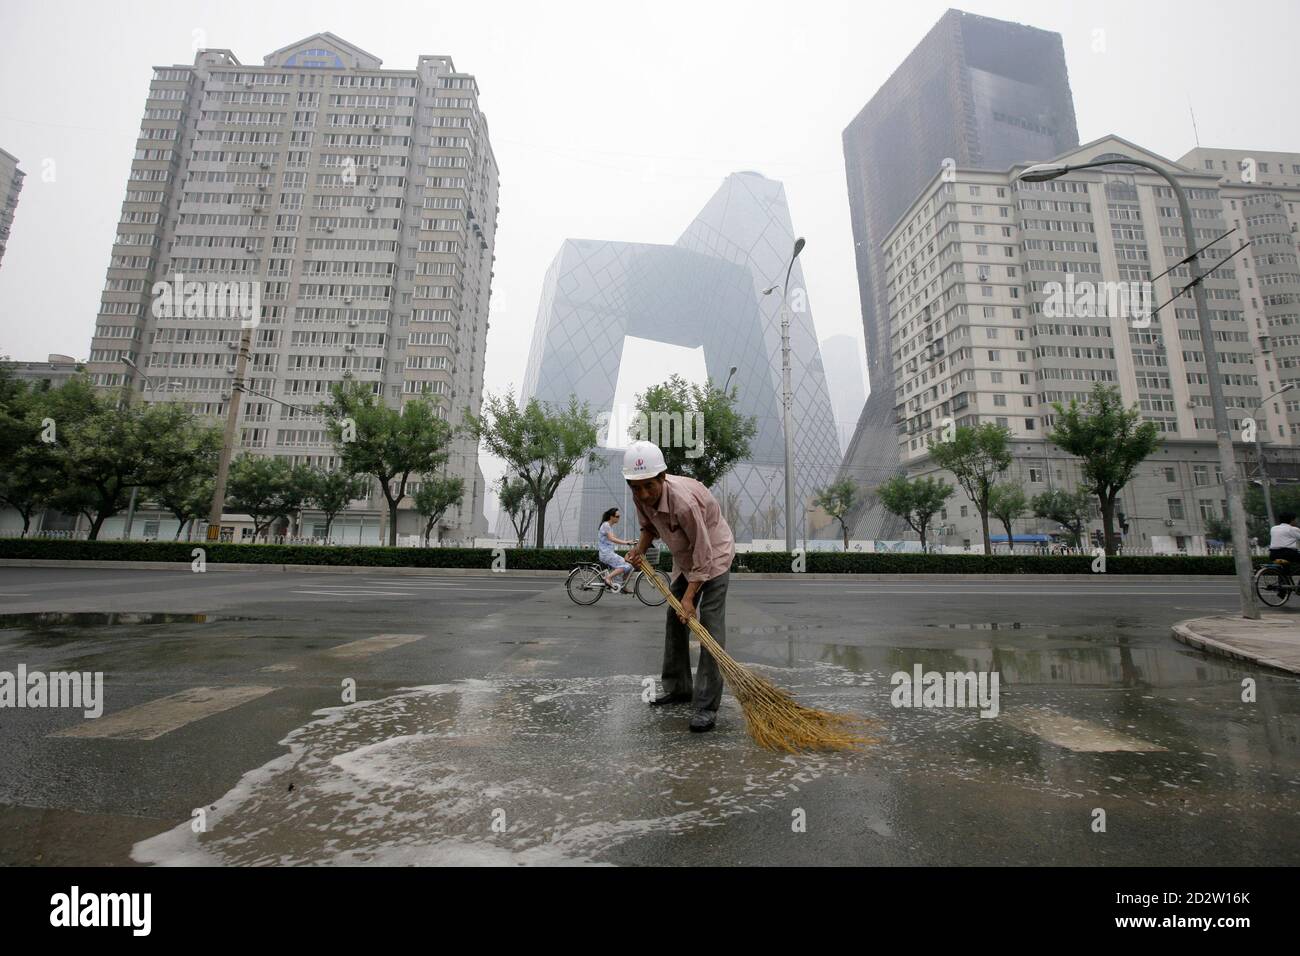 A worker sweeps water off a street at the Central Business District in Beijing July 16, 2009. China's annual GDP growth accelerated to 7.9 percent in the second quarter from 6.1 percent in the first quarter, as a surge in bank lending and government spending made it the best-performing major economy in the world. REUTERS/Jason Lee (CHINA BUSINESS) Stock Photo